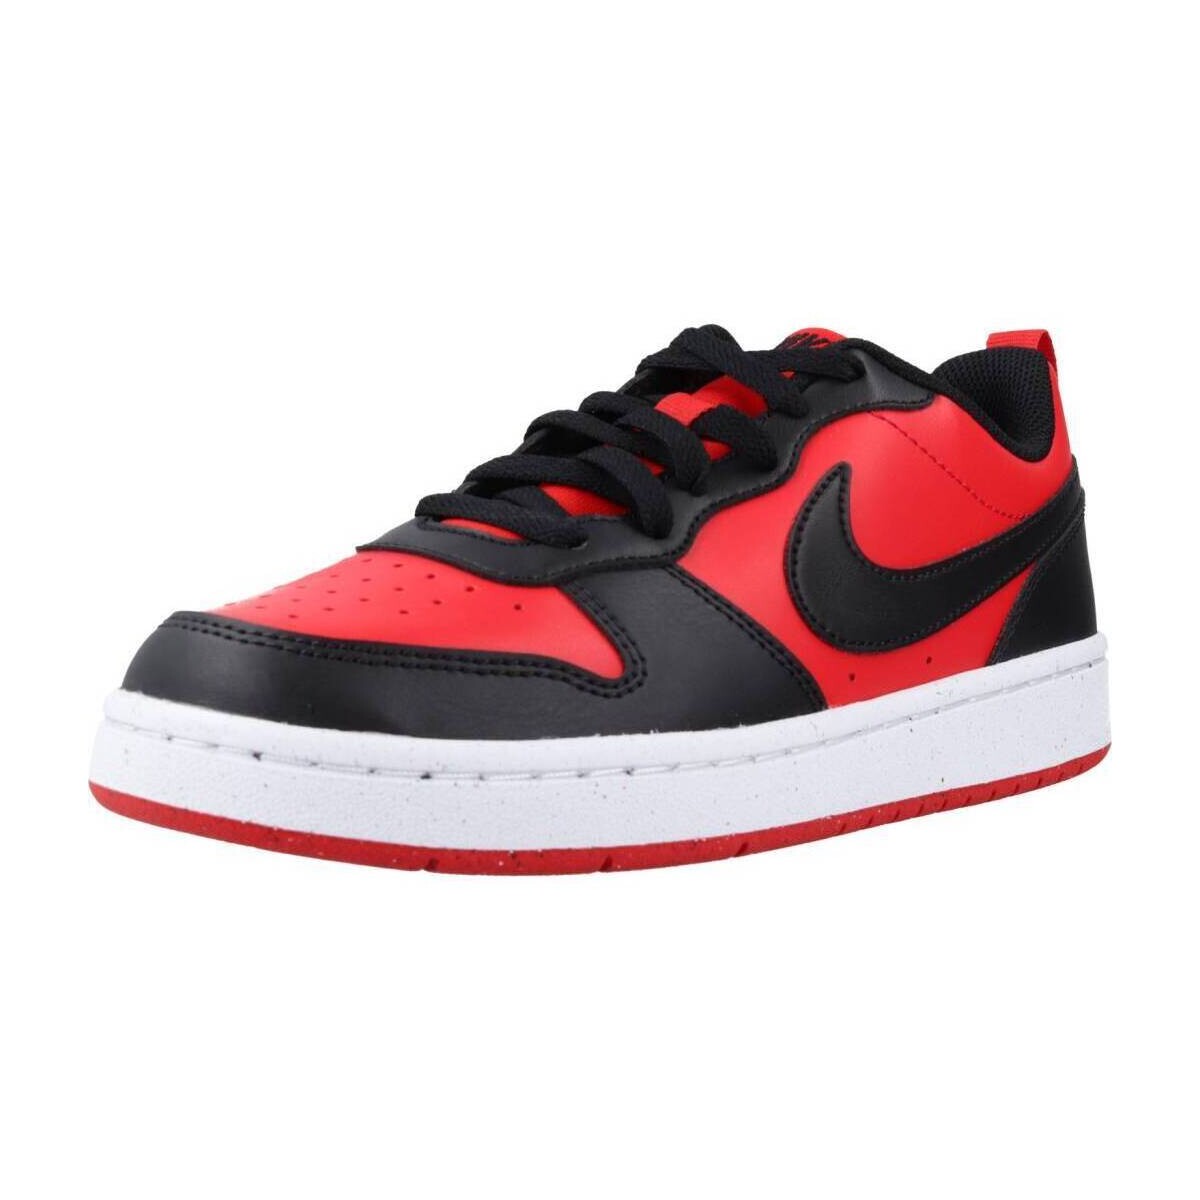 Xαμηλά Sneakers Nike COURT BOROUGH LOW RECRAFT (GS)